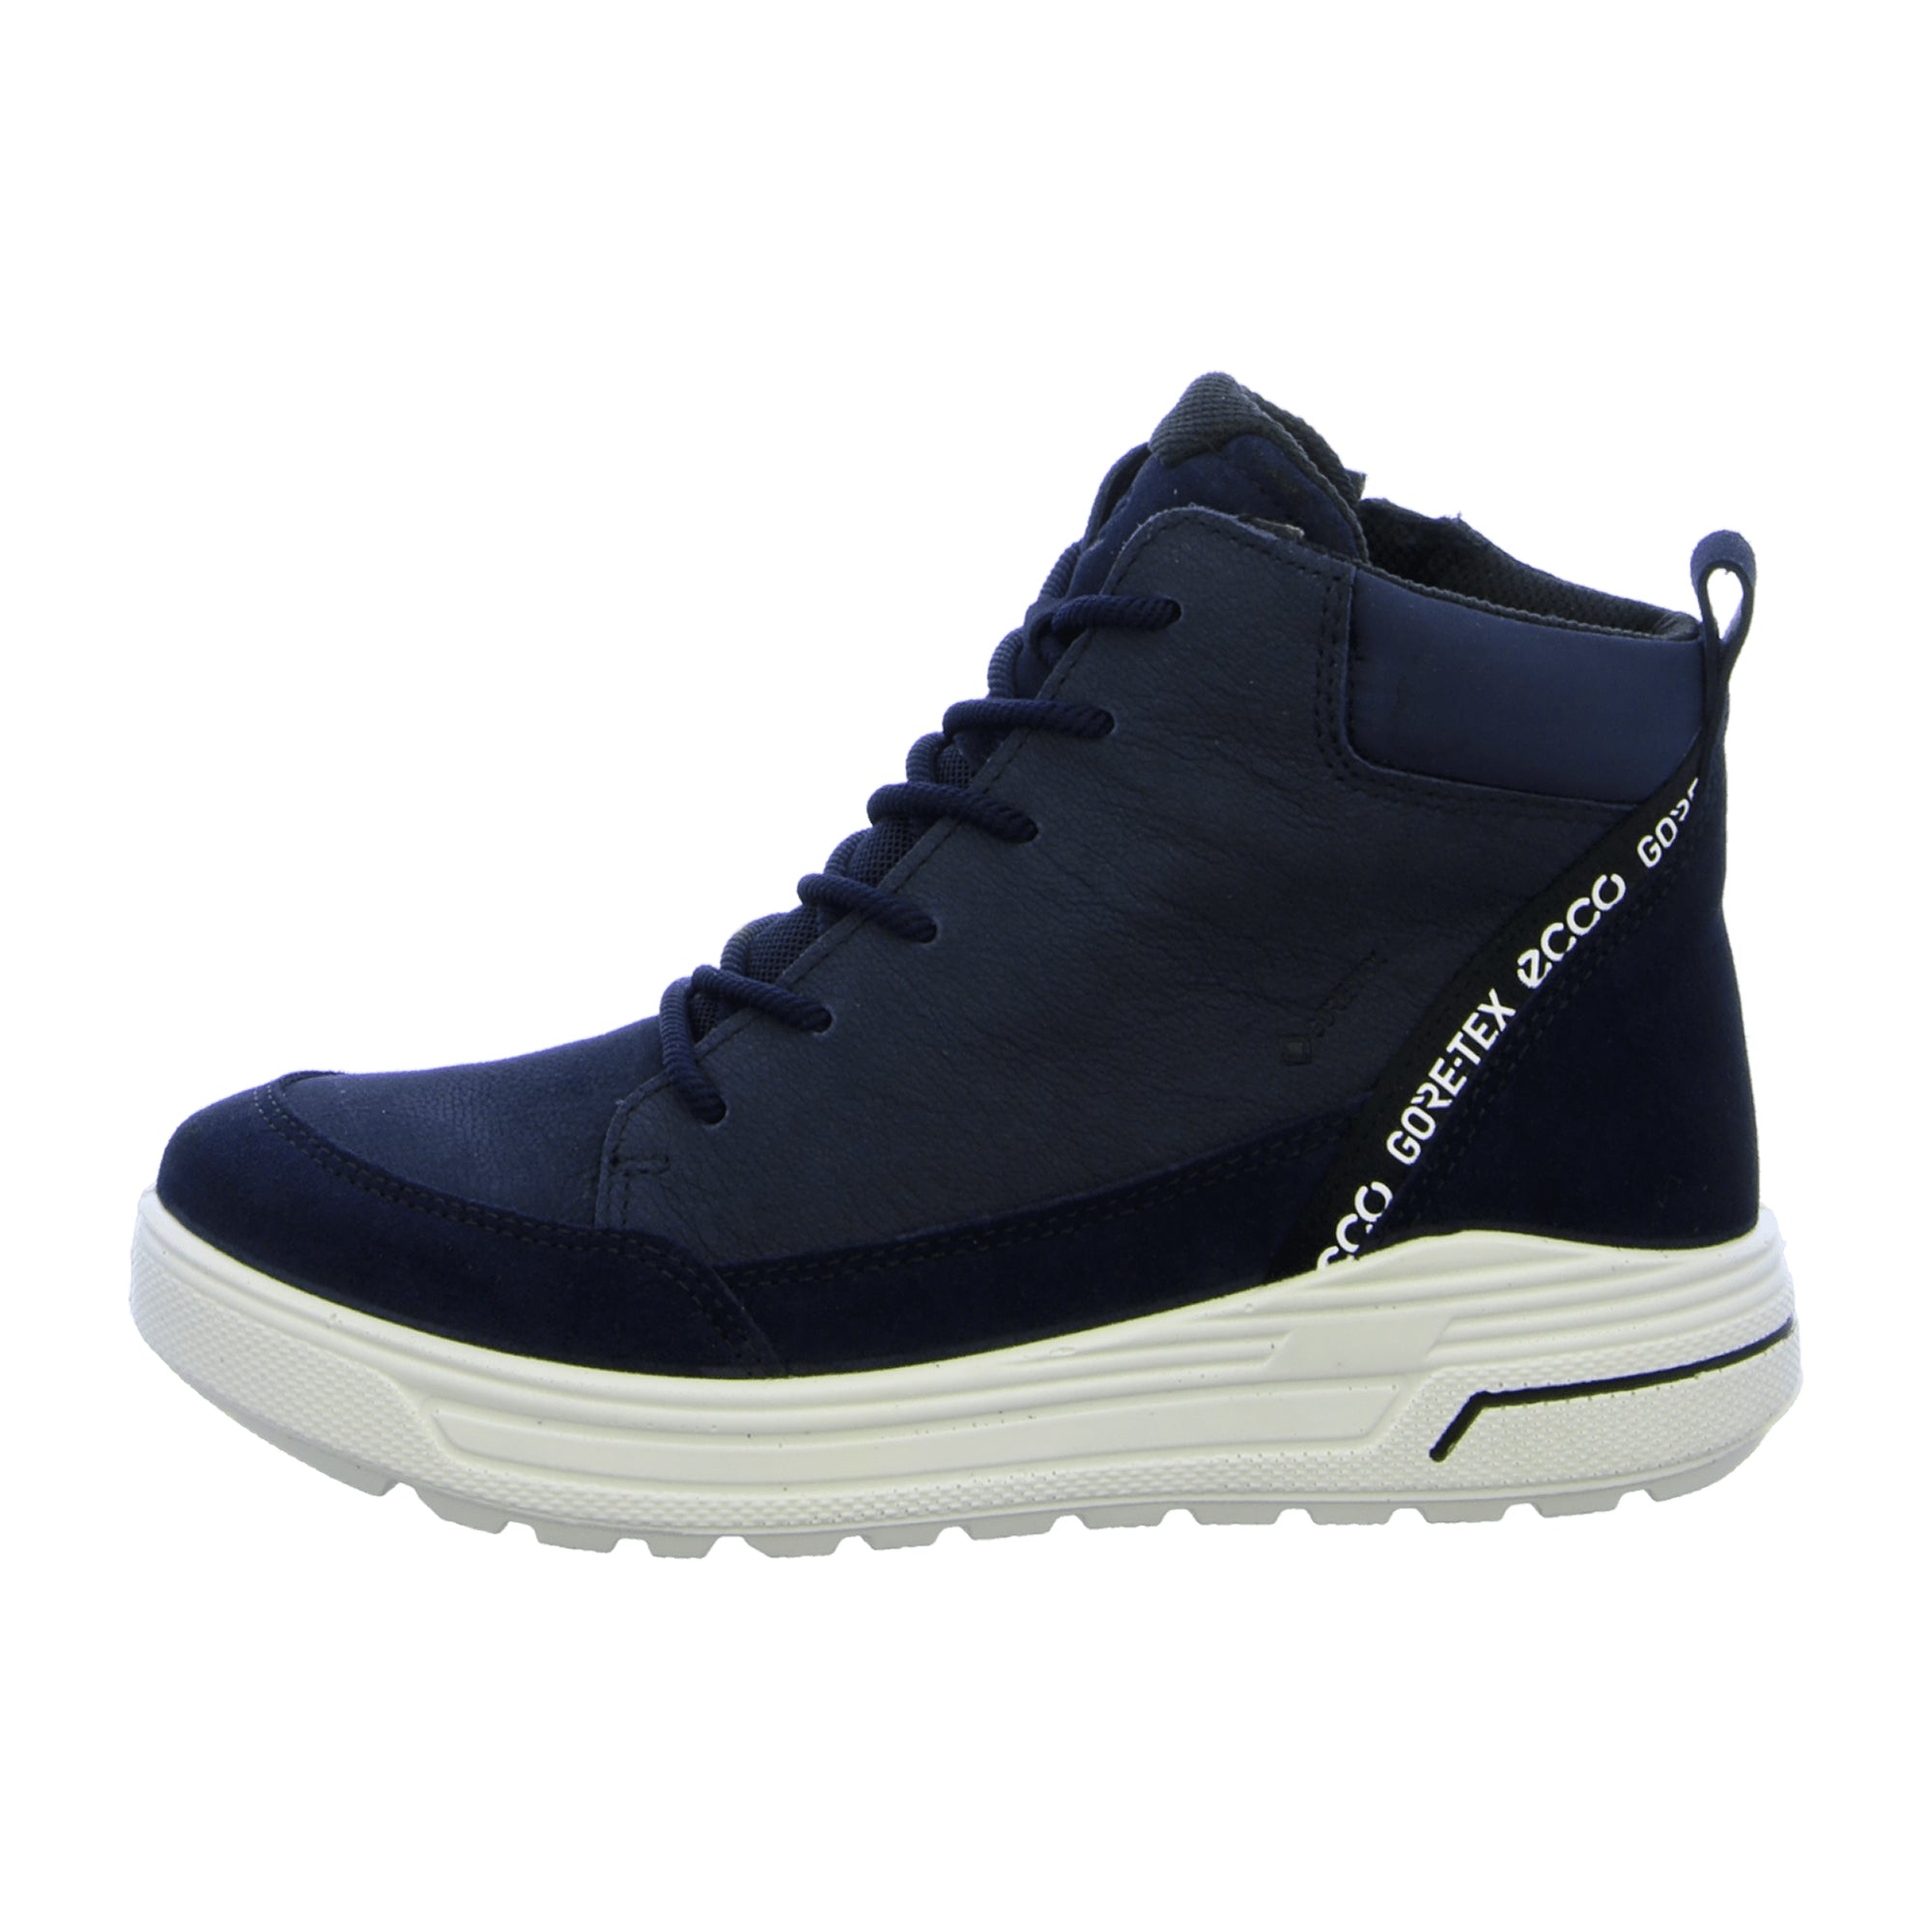 Ecco Urban Kids | Stylish & Durable Blue Sneakers for Children